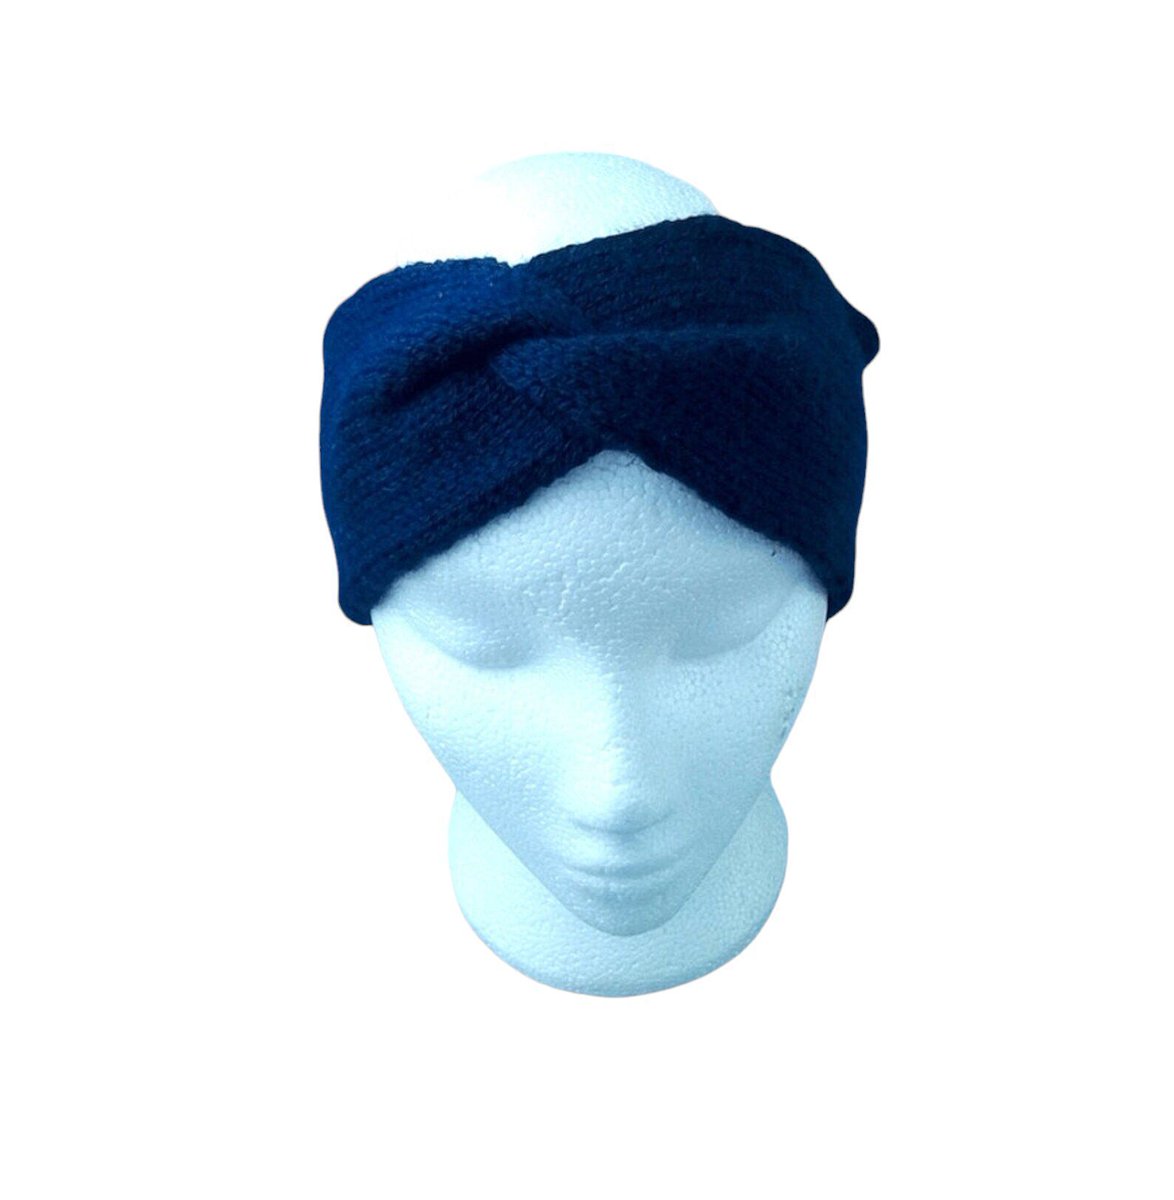 #MHHSBD 

𝗛𝗮𝗻𝗱 𝗸𝗻𝗶𝘁𝘁𝗲𝗱 𝗹𝗮𝗱𝗶𝗲𝘀 𝗵𝗲𝗮𝗱𝗯𝗮𝗻𝗱 

Beat the chill with our hand-knitted navy blue twisted headband ear warmer! An elegant ladies' accessory and a chic alternative to winter hats. Stay warm in style! 

knittingtopia.etsy.com/listing/168316…